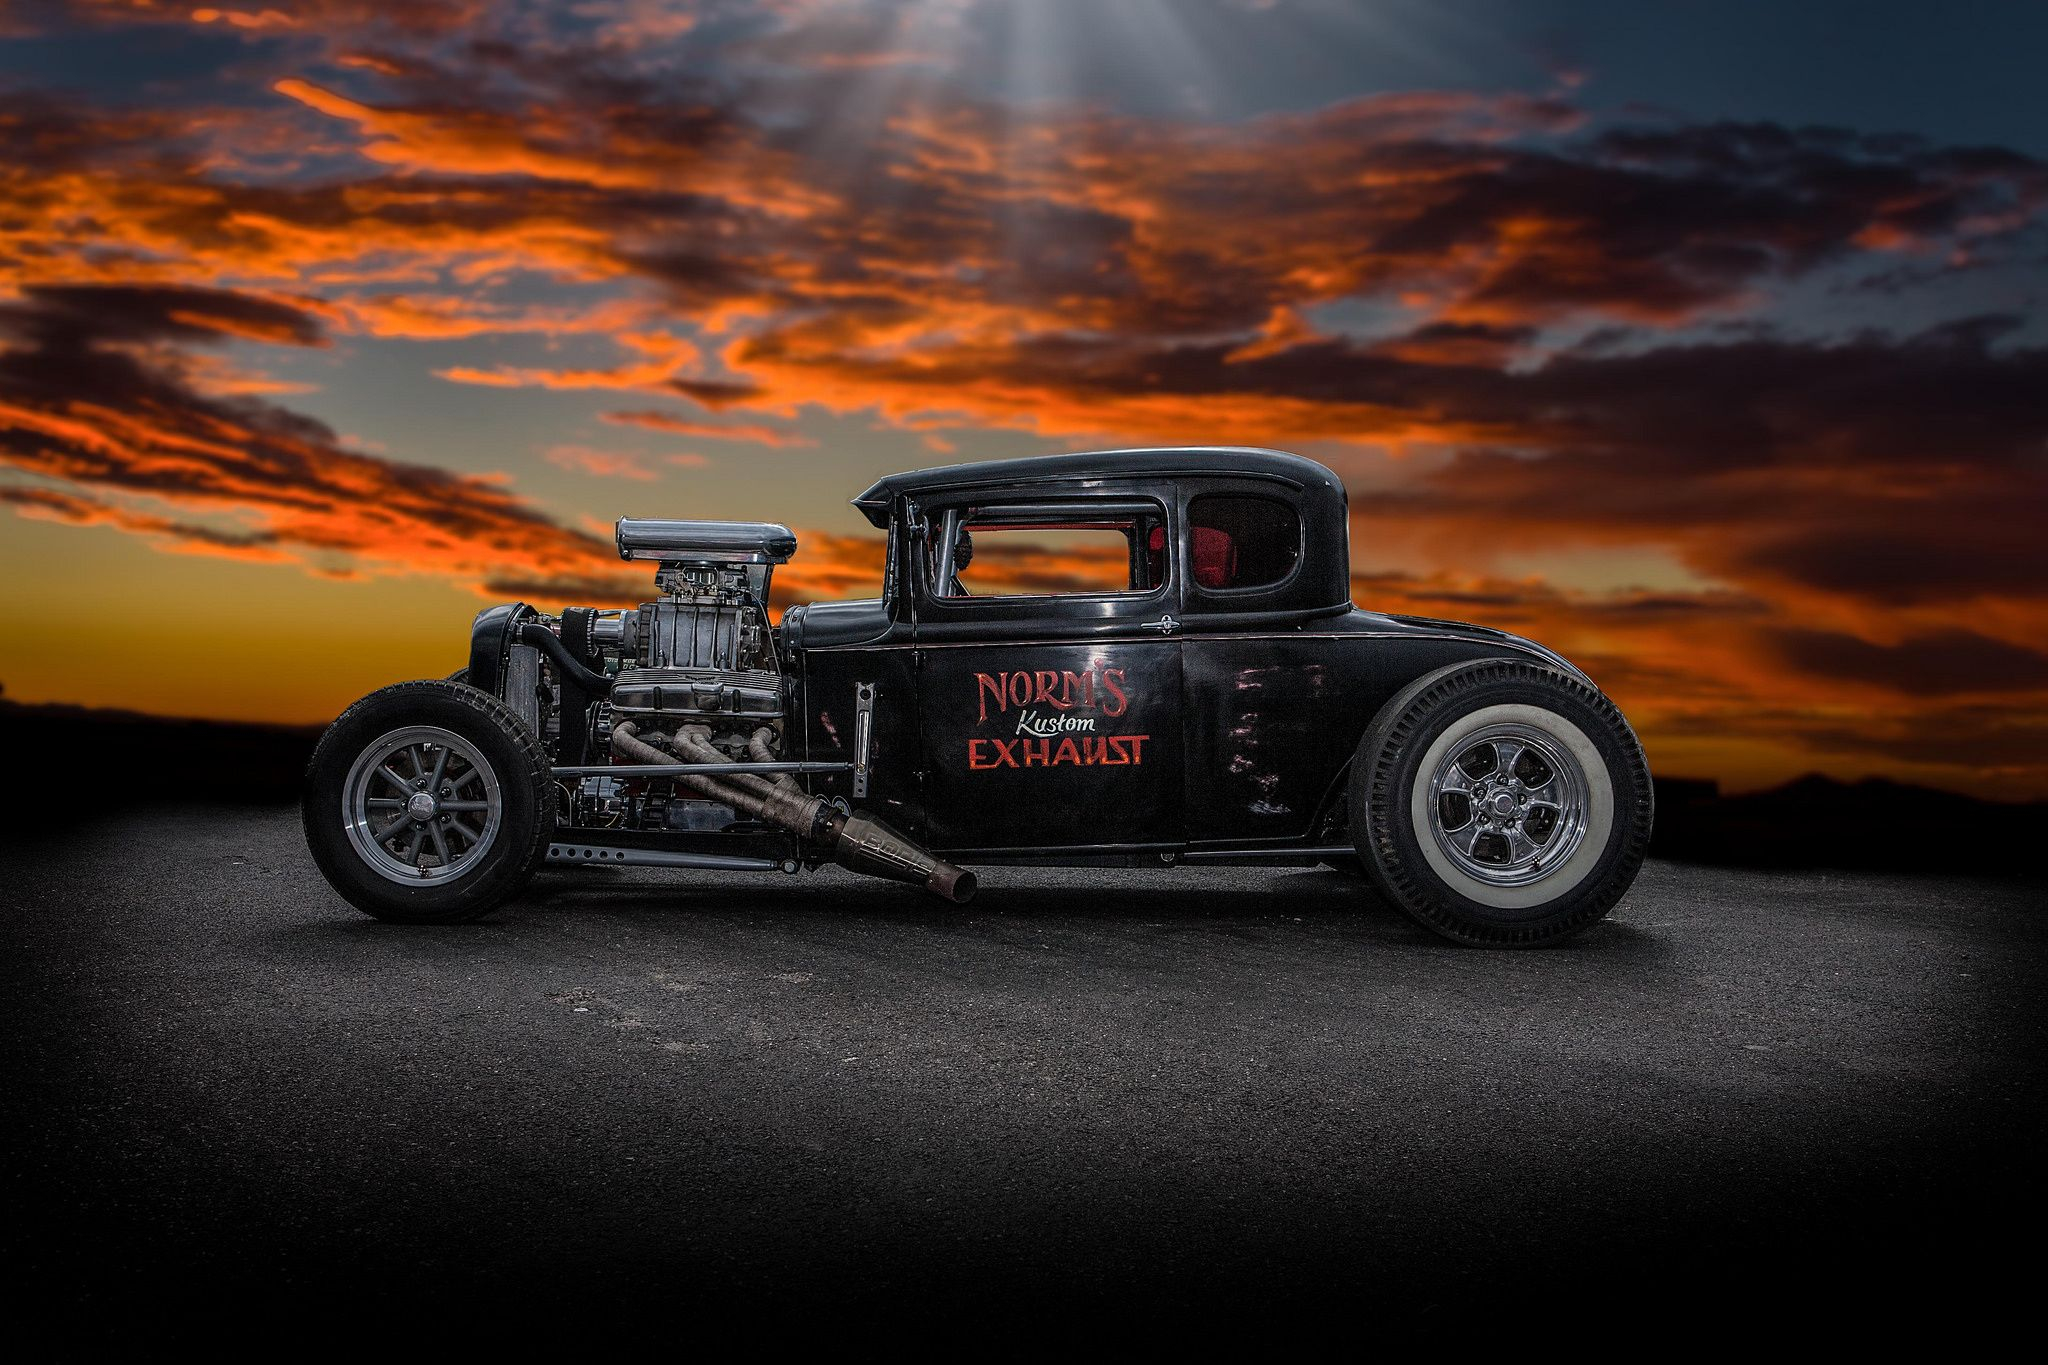 2048x1365 Awesome | Hot rods, Hot rods cars, Vintage cars